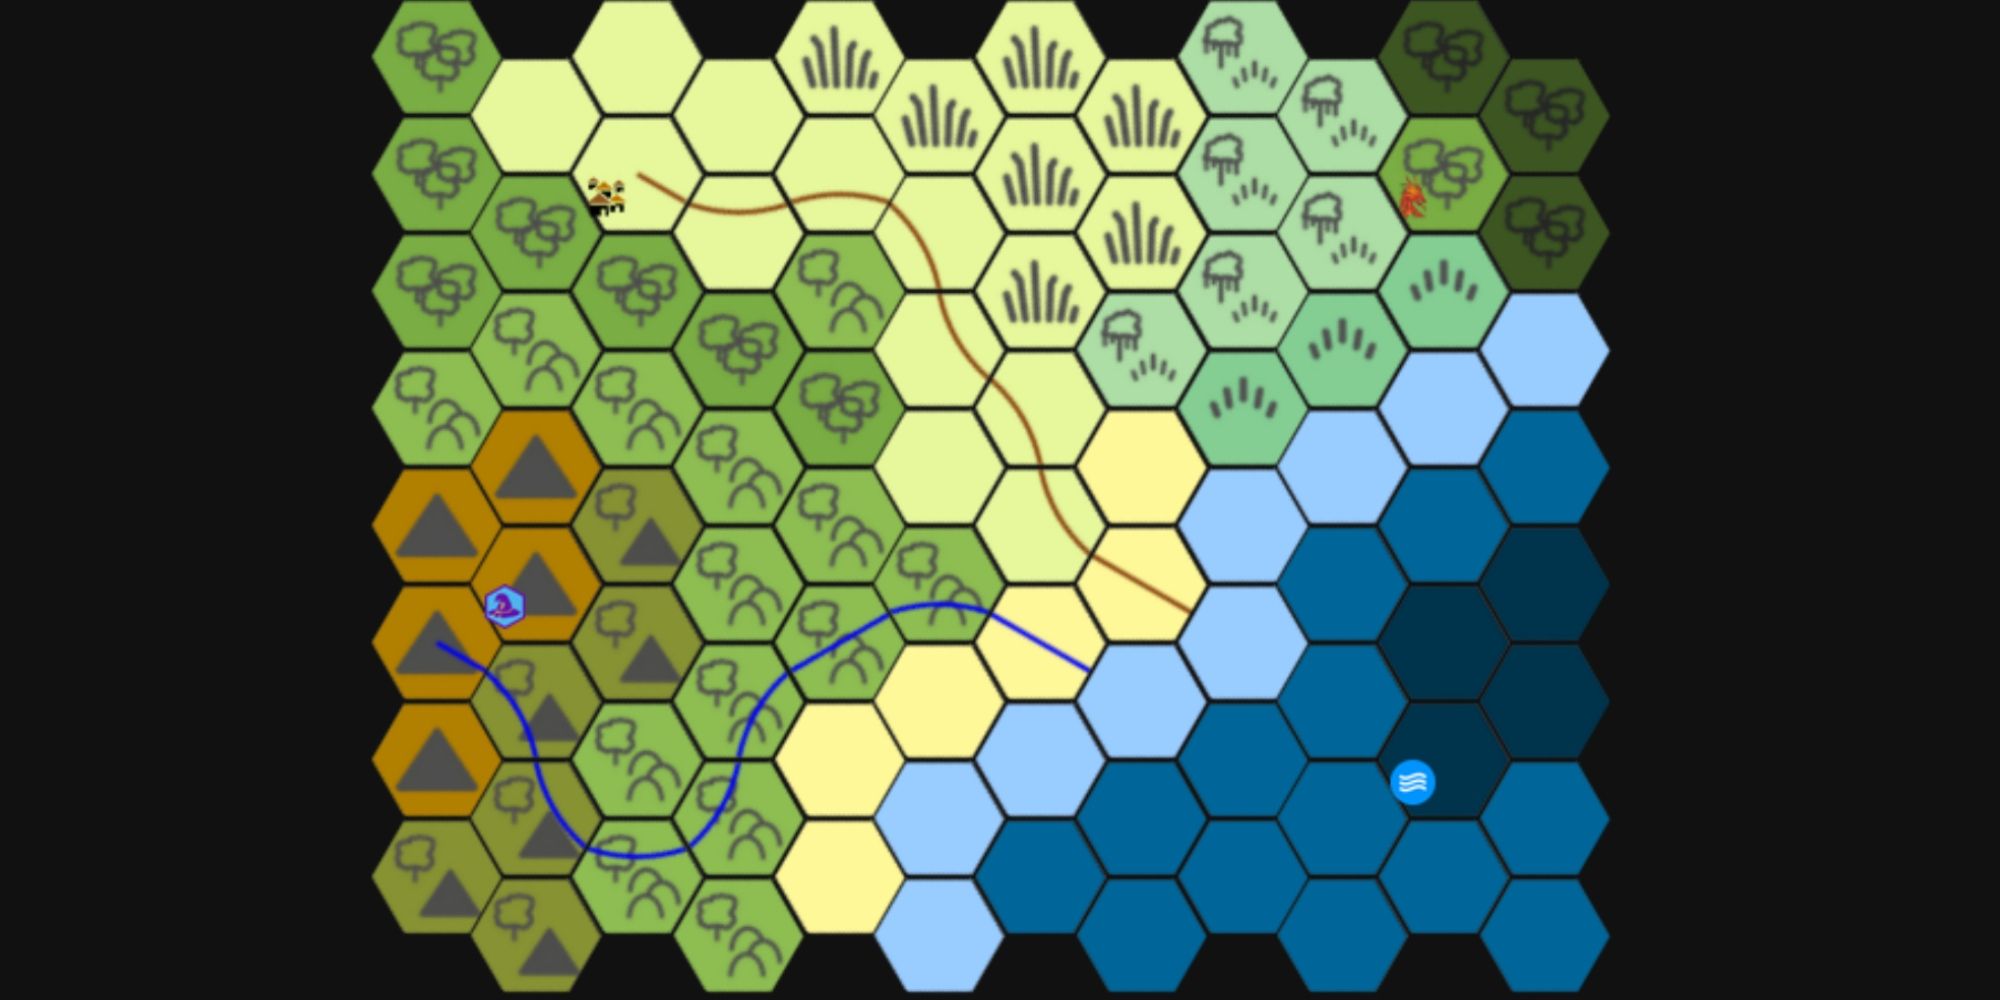 A simple dnd map made of colored and labeled hexagonal tiles to bring the scene together.